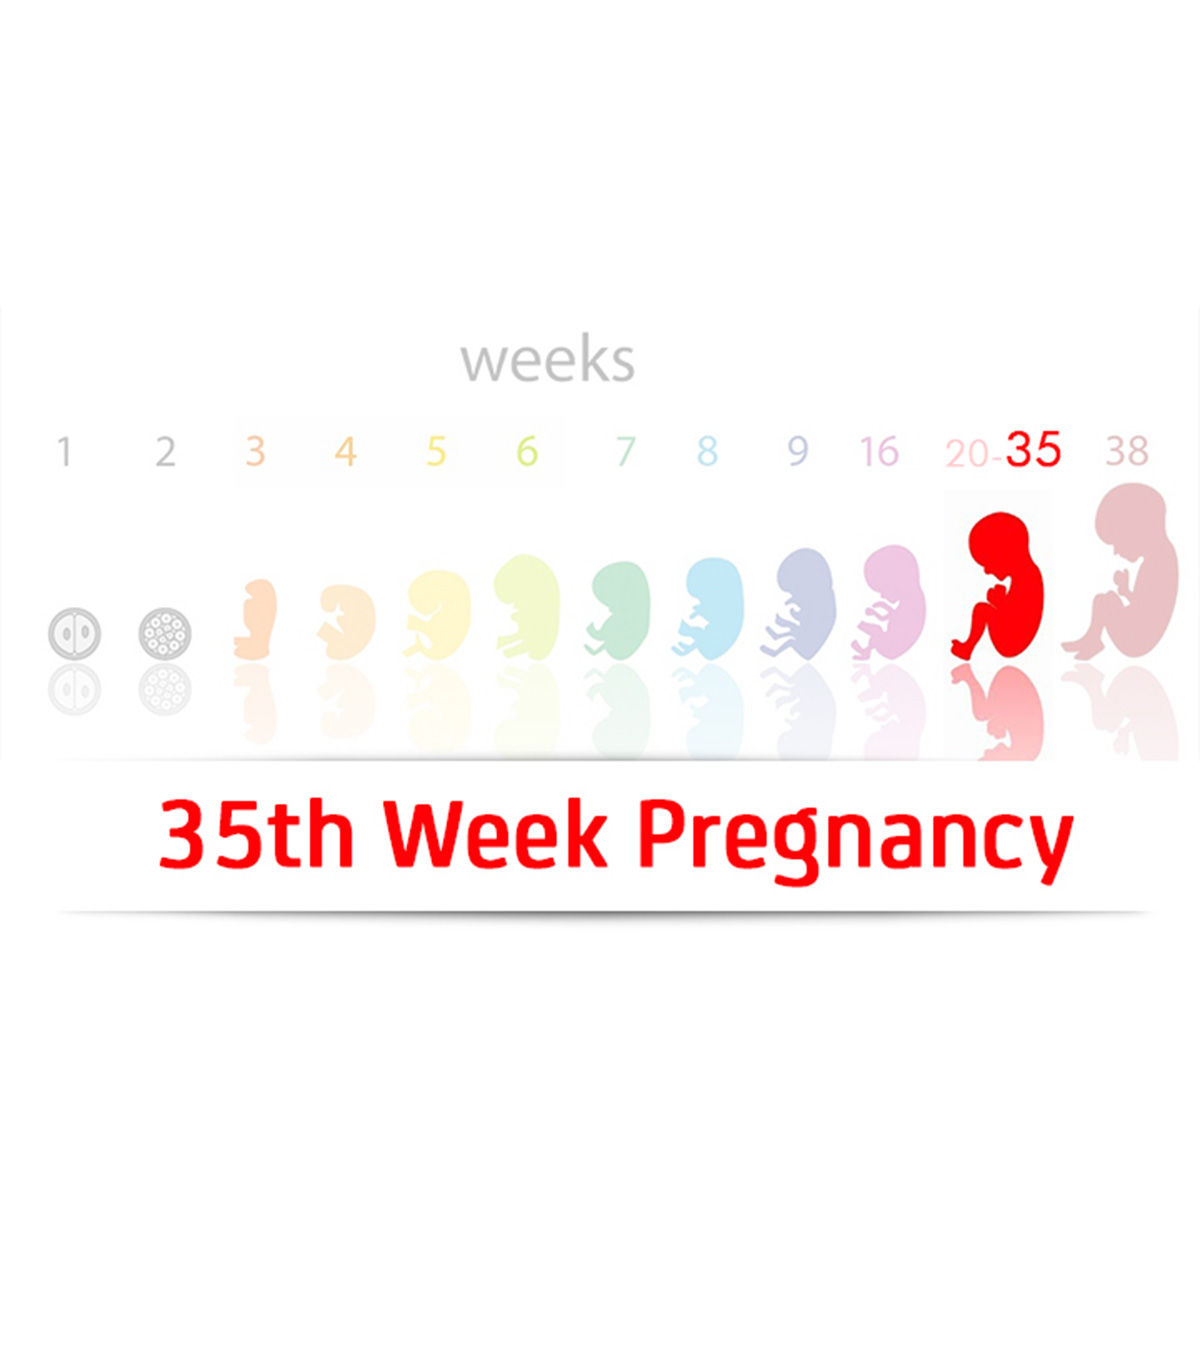 35th Week Pregnancy: Symptoms, Baby Development And Tips